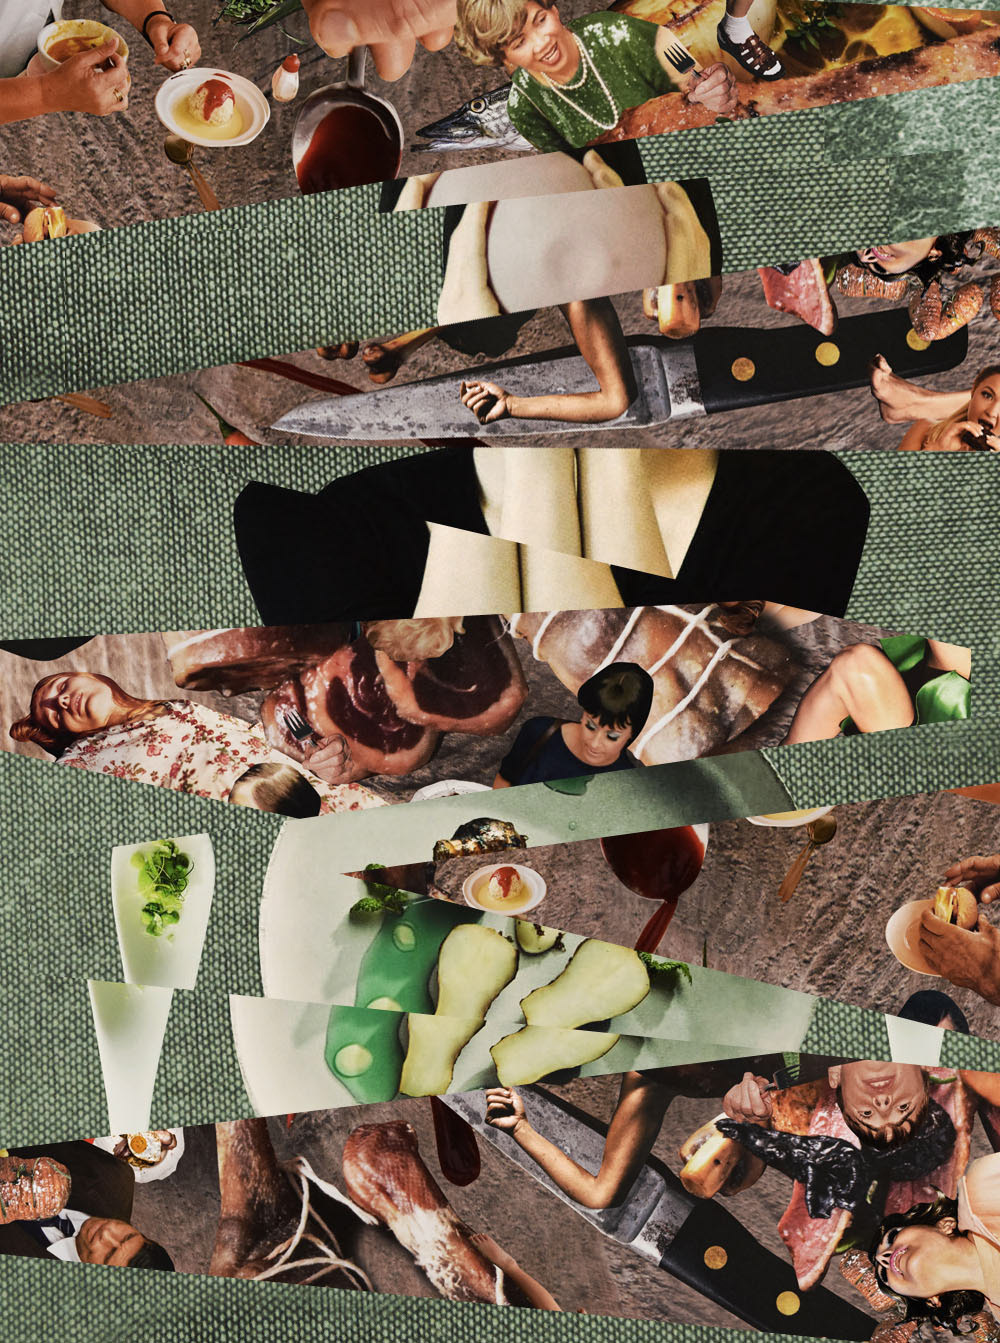 Commissioned Concept Collage by Christian Barthold // www.behance.net/christian-barthold